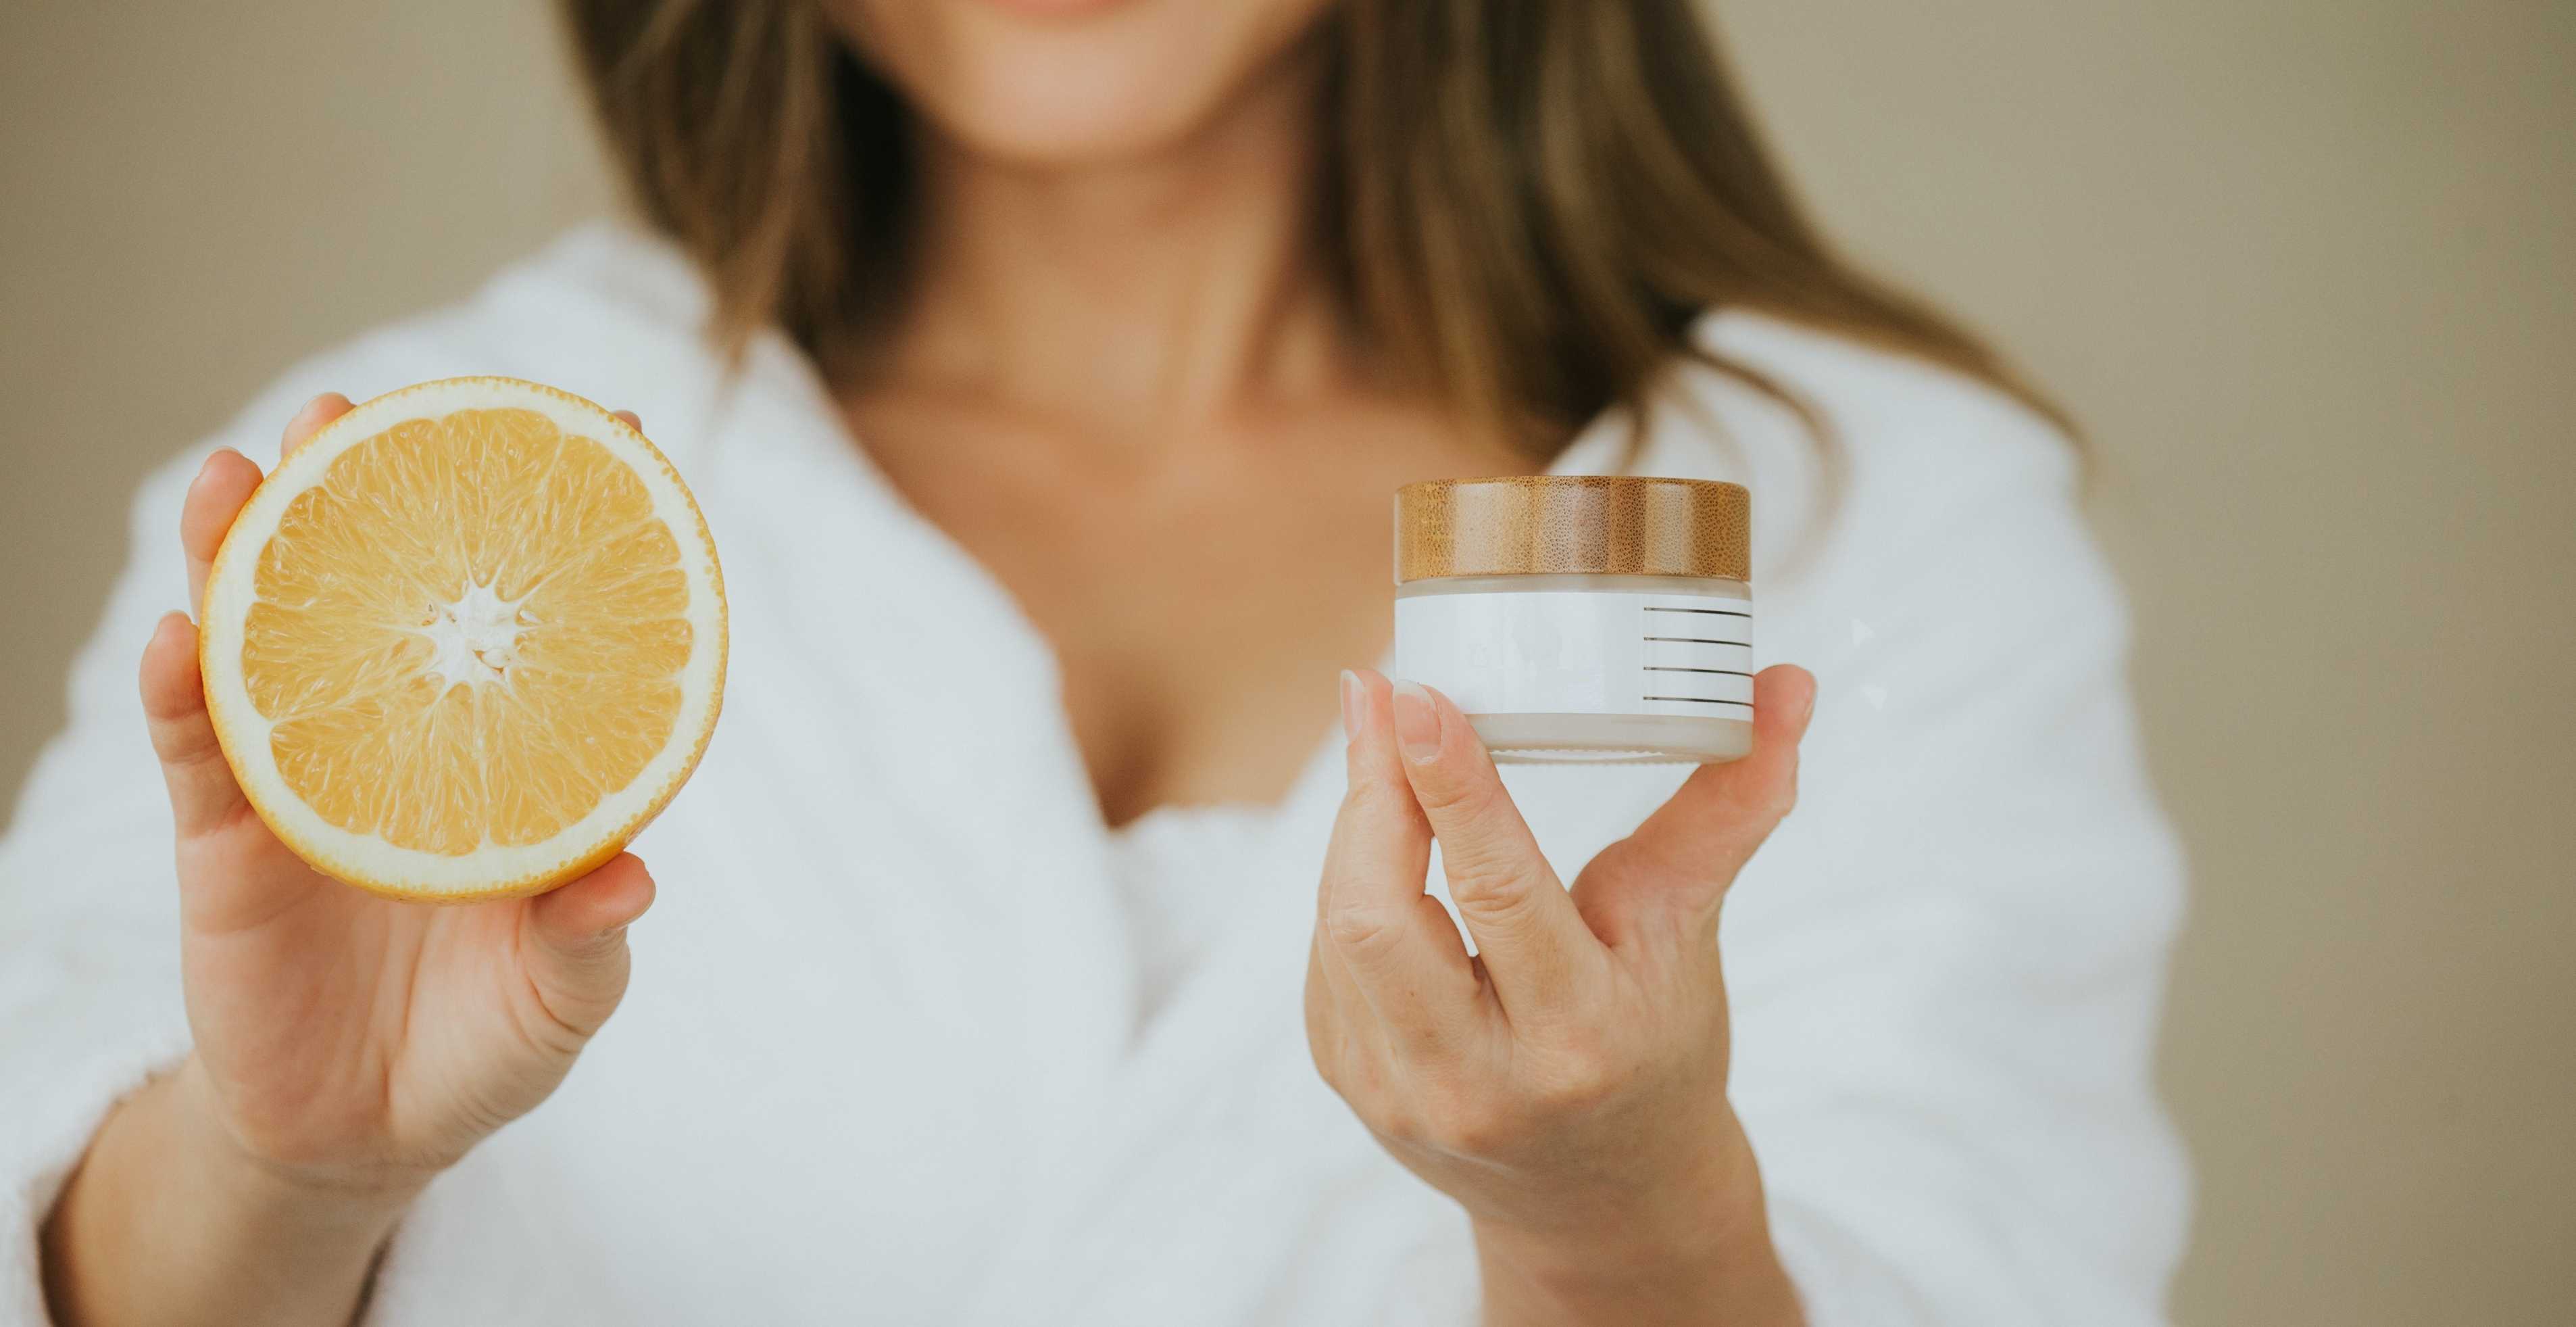 Vitamin C in Skincare: 6 Reasons Why You Should Use It